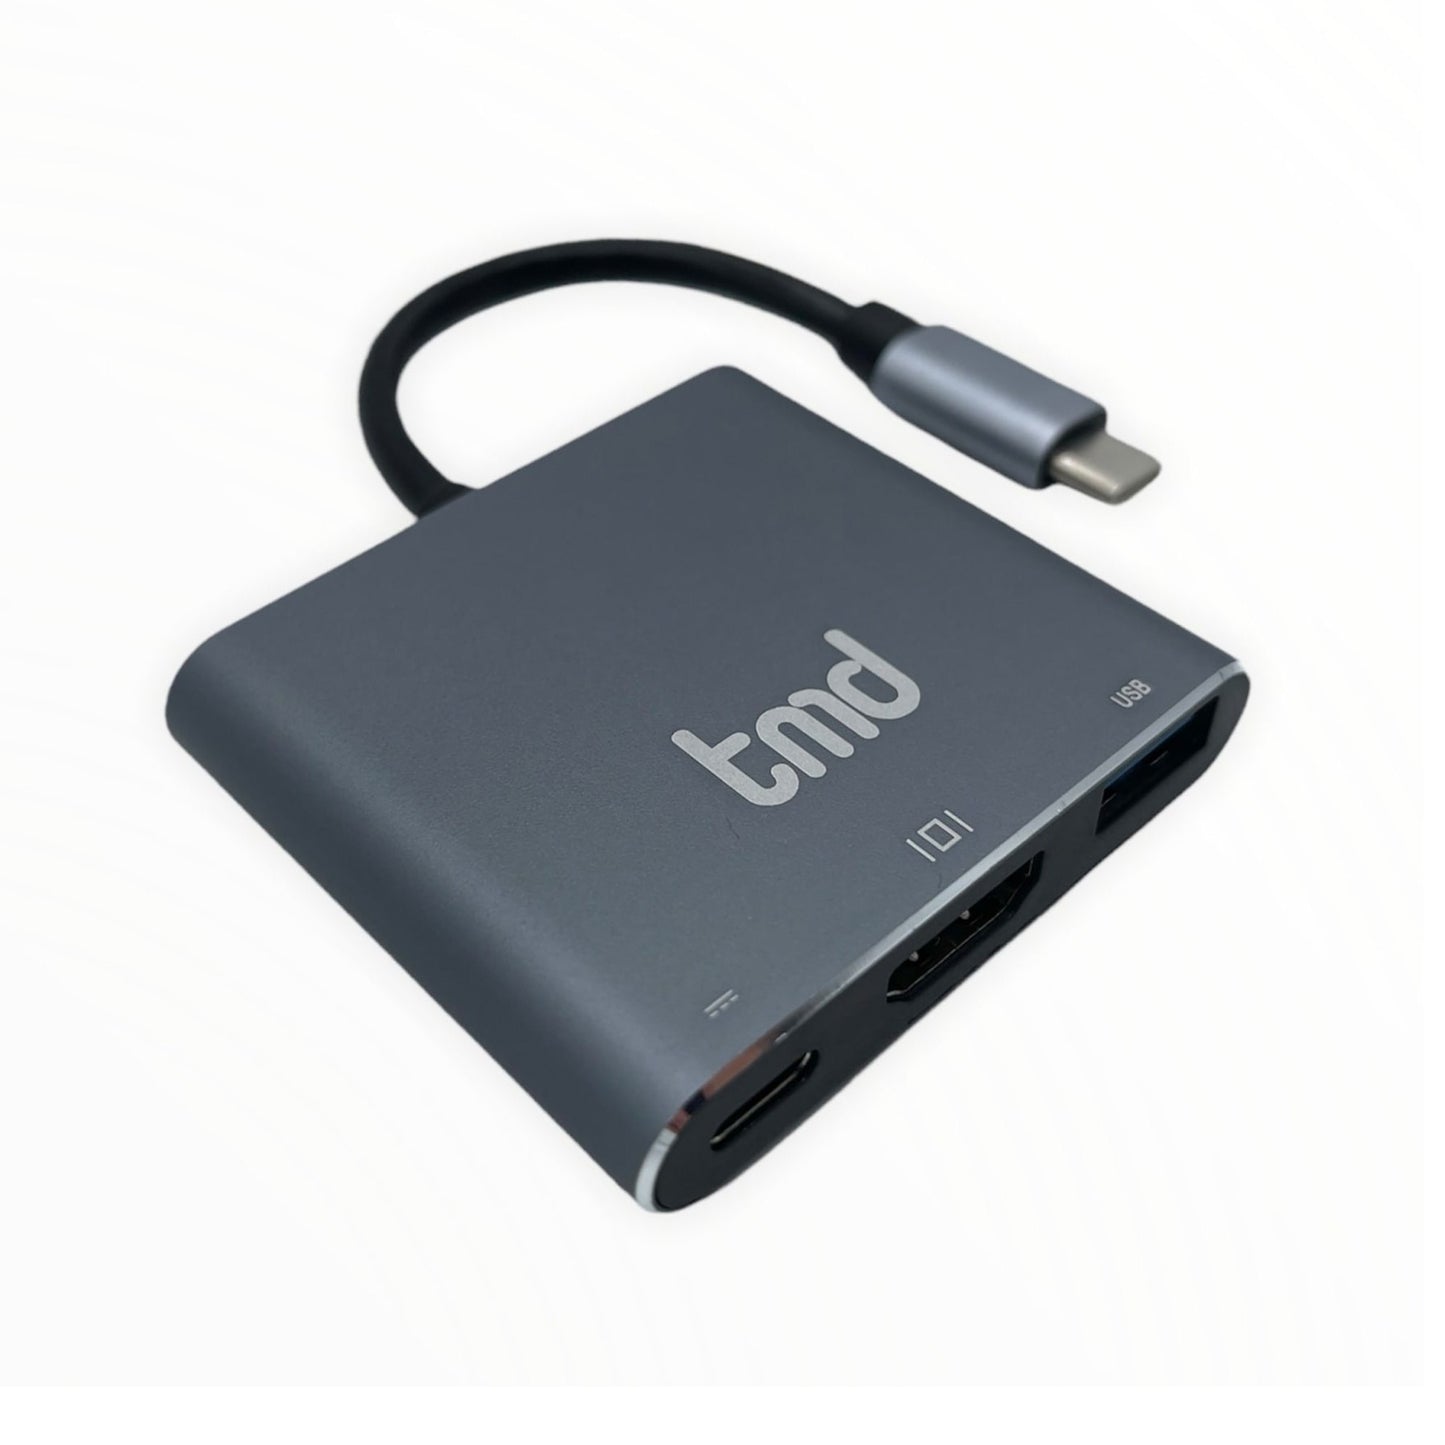 tmd USB-C to 4K HDMI Multifunction Adapter with Power Delivery & USB-A Port - Grey - 15-10489